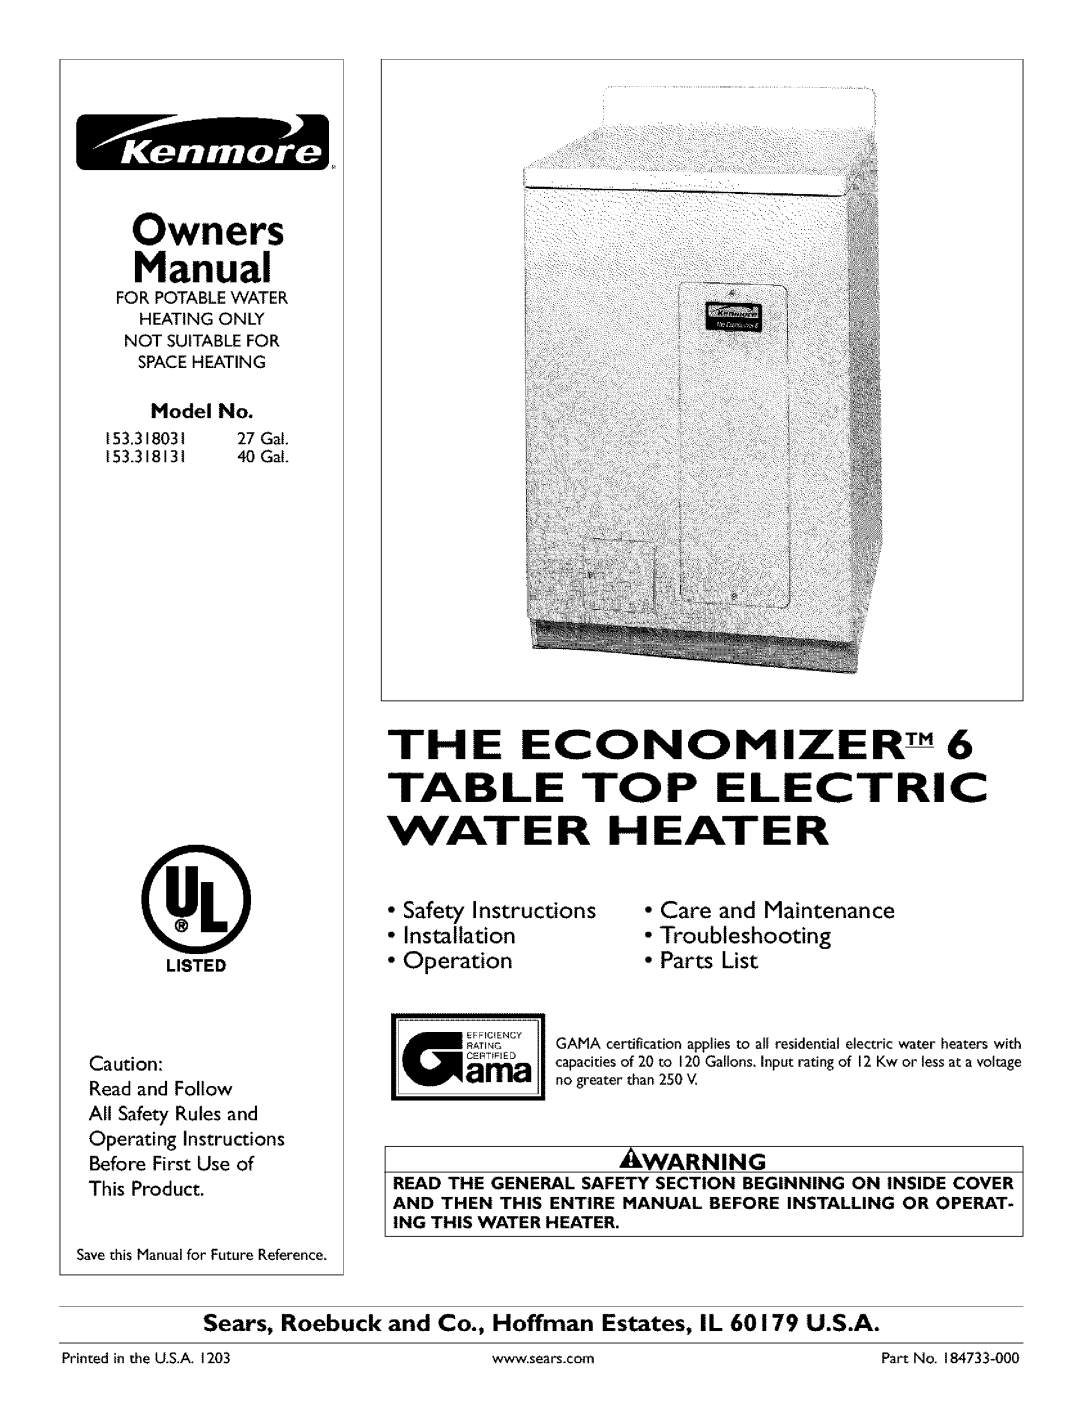 Kenmore 153.318031, 153.318131 owner manual THE ECONOMIZERTM6, Installation, Table Top Electric Water Heater 